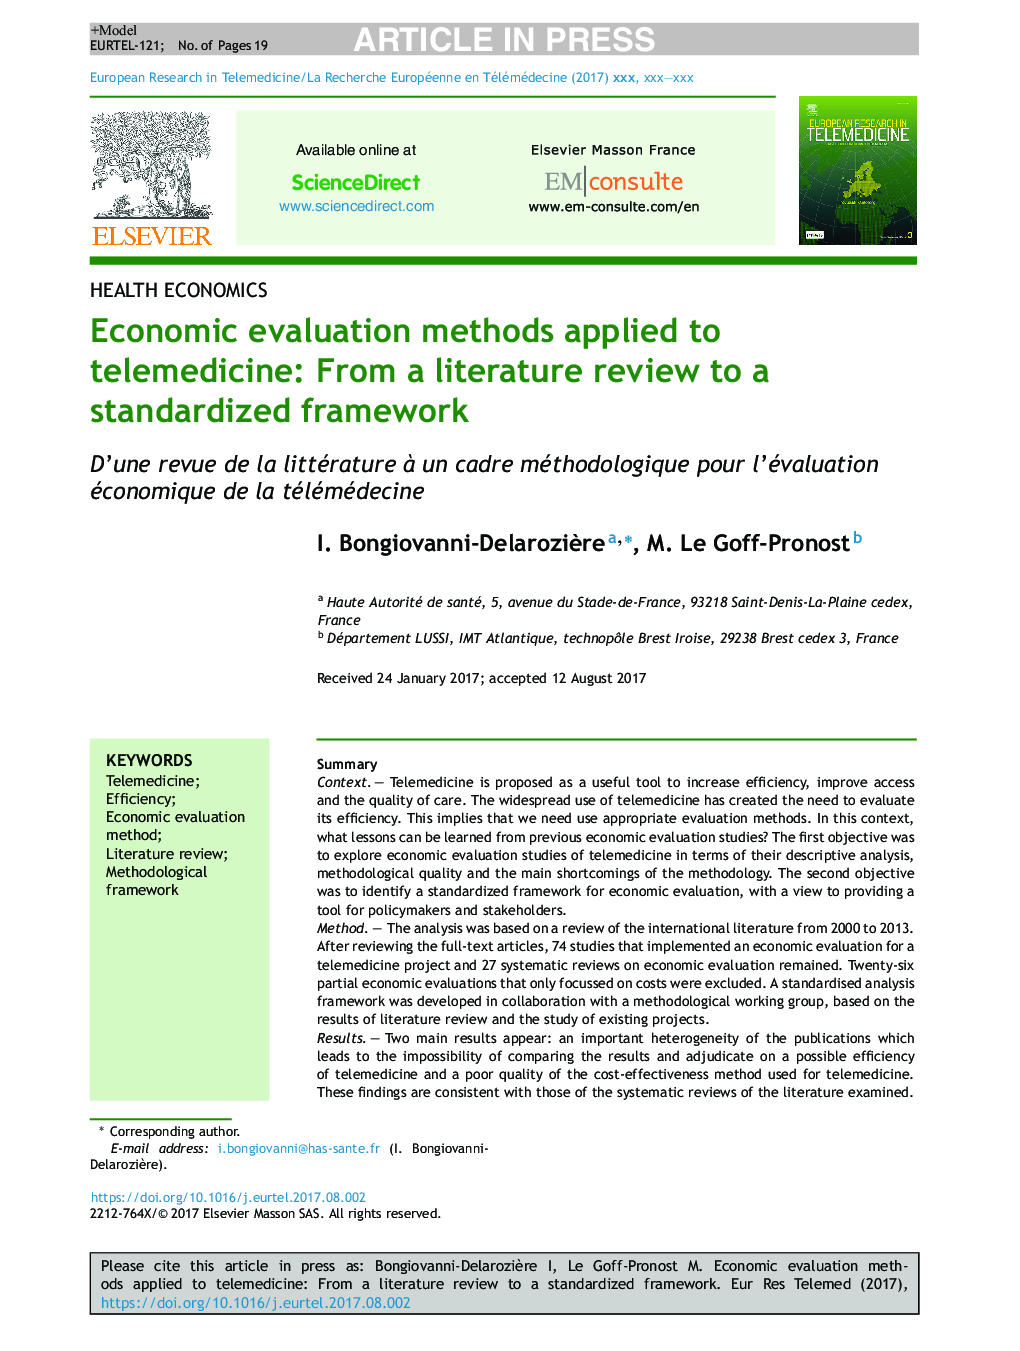 Economic evaluation methods applied to telemedicine: From a literature review to a standardized framework